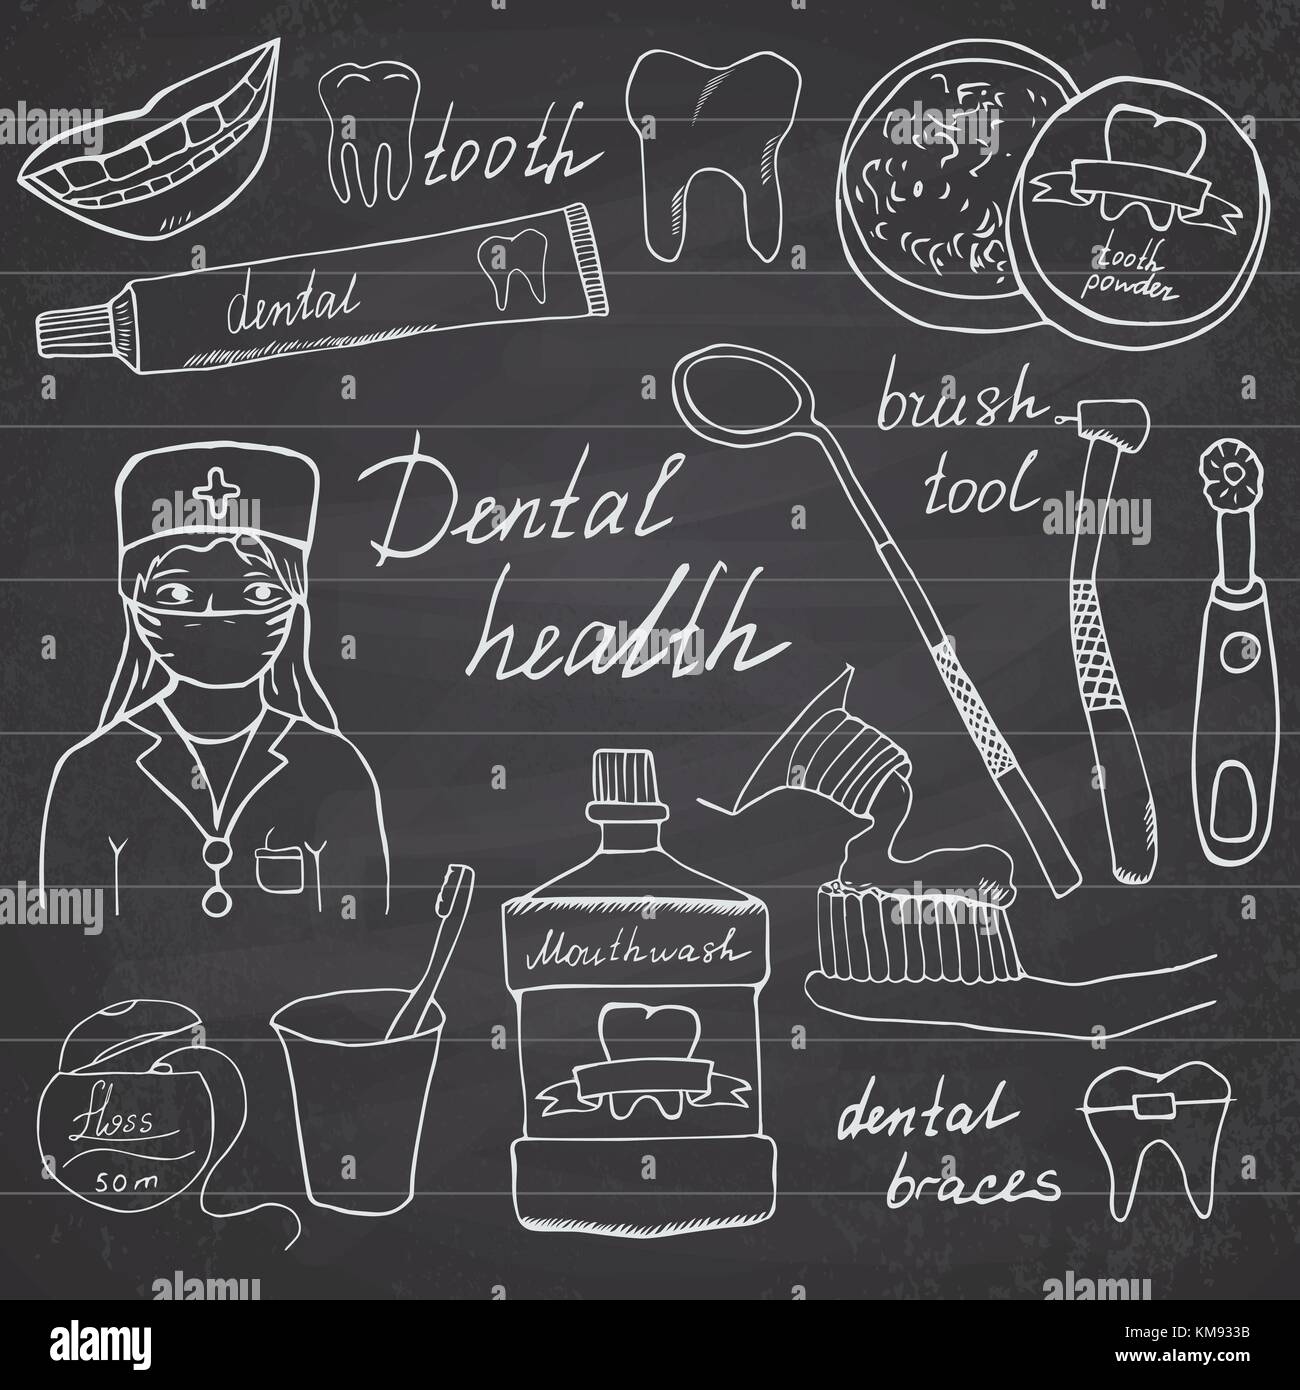 Dental health doodles icons set. Hand drawn sketch with teeth, toothpaste toothbrush dentist mouth wash and floss. vector illustration on chalkboard b Stock Vector